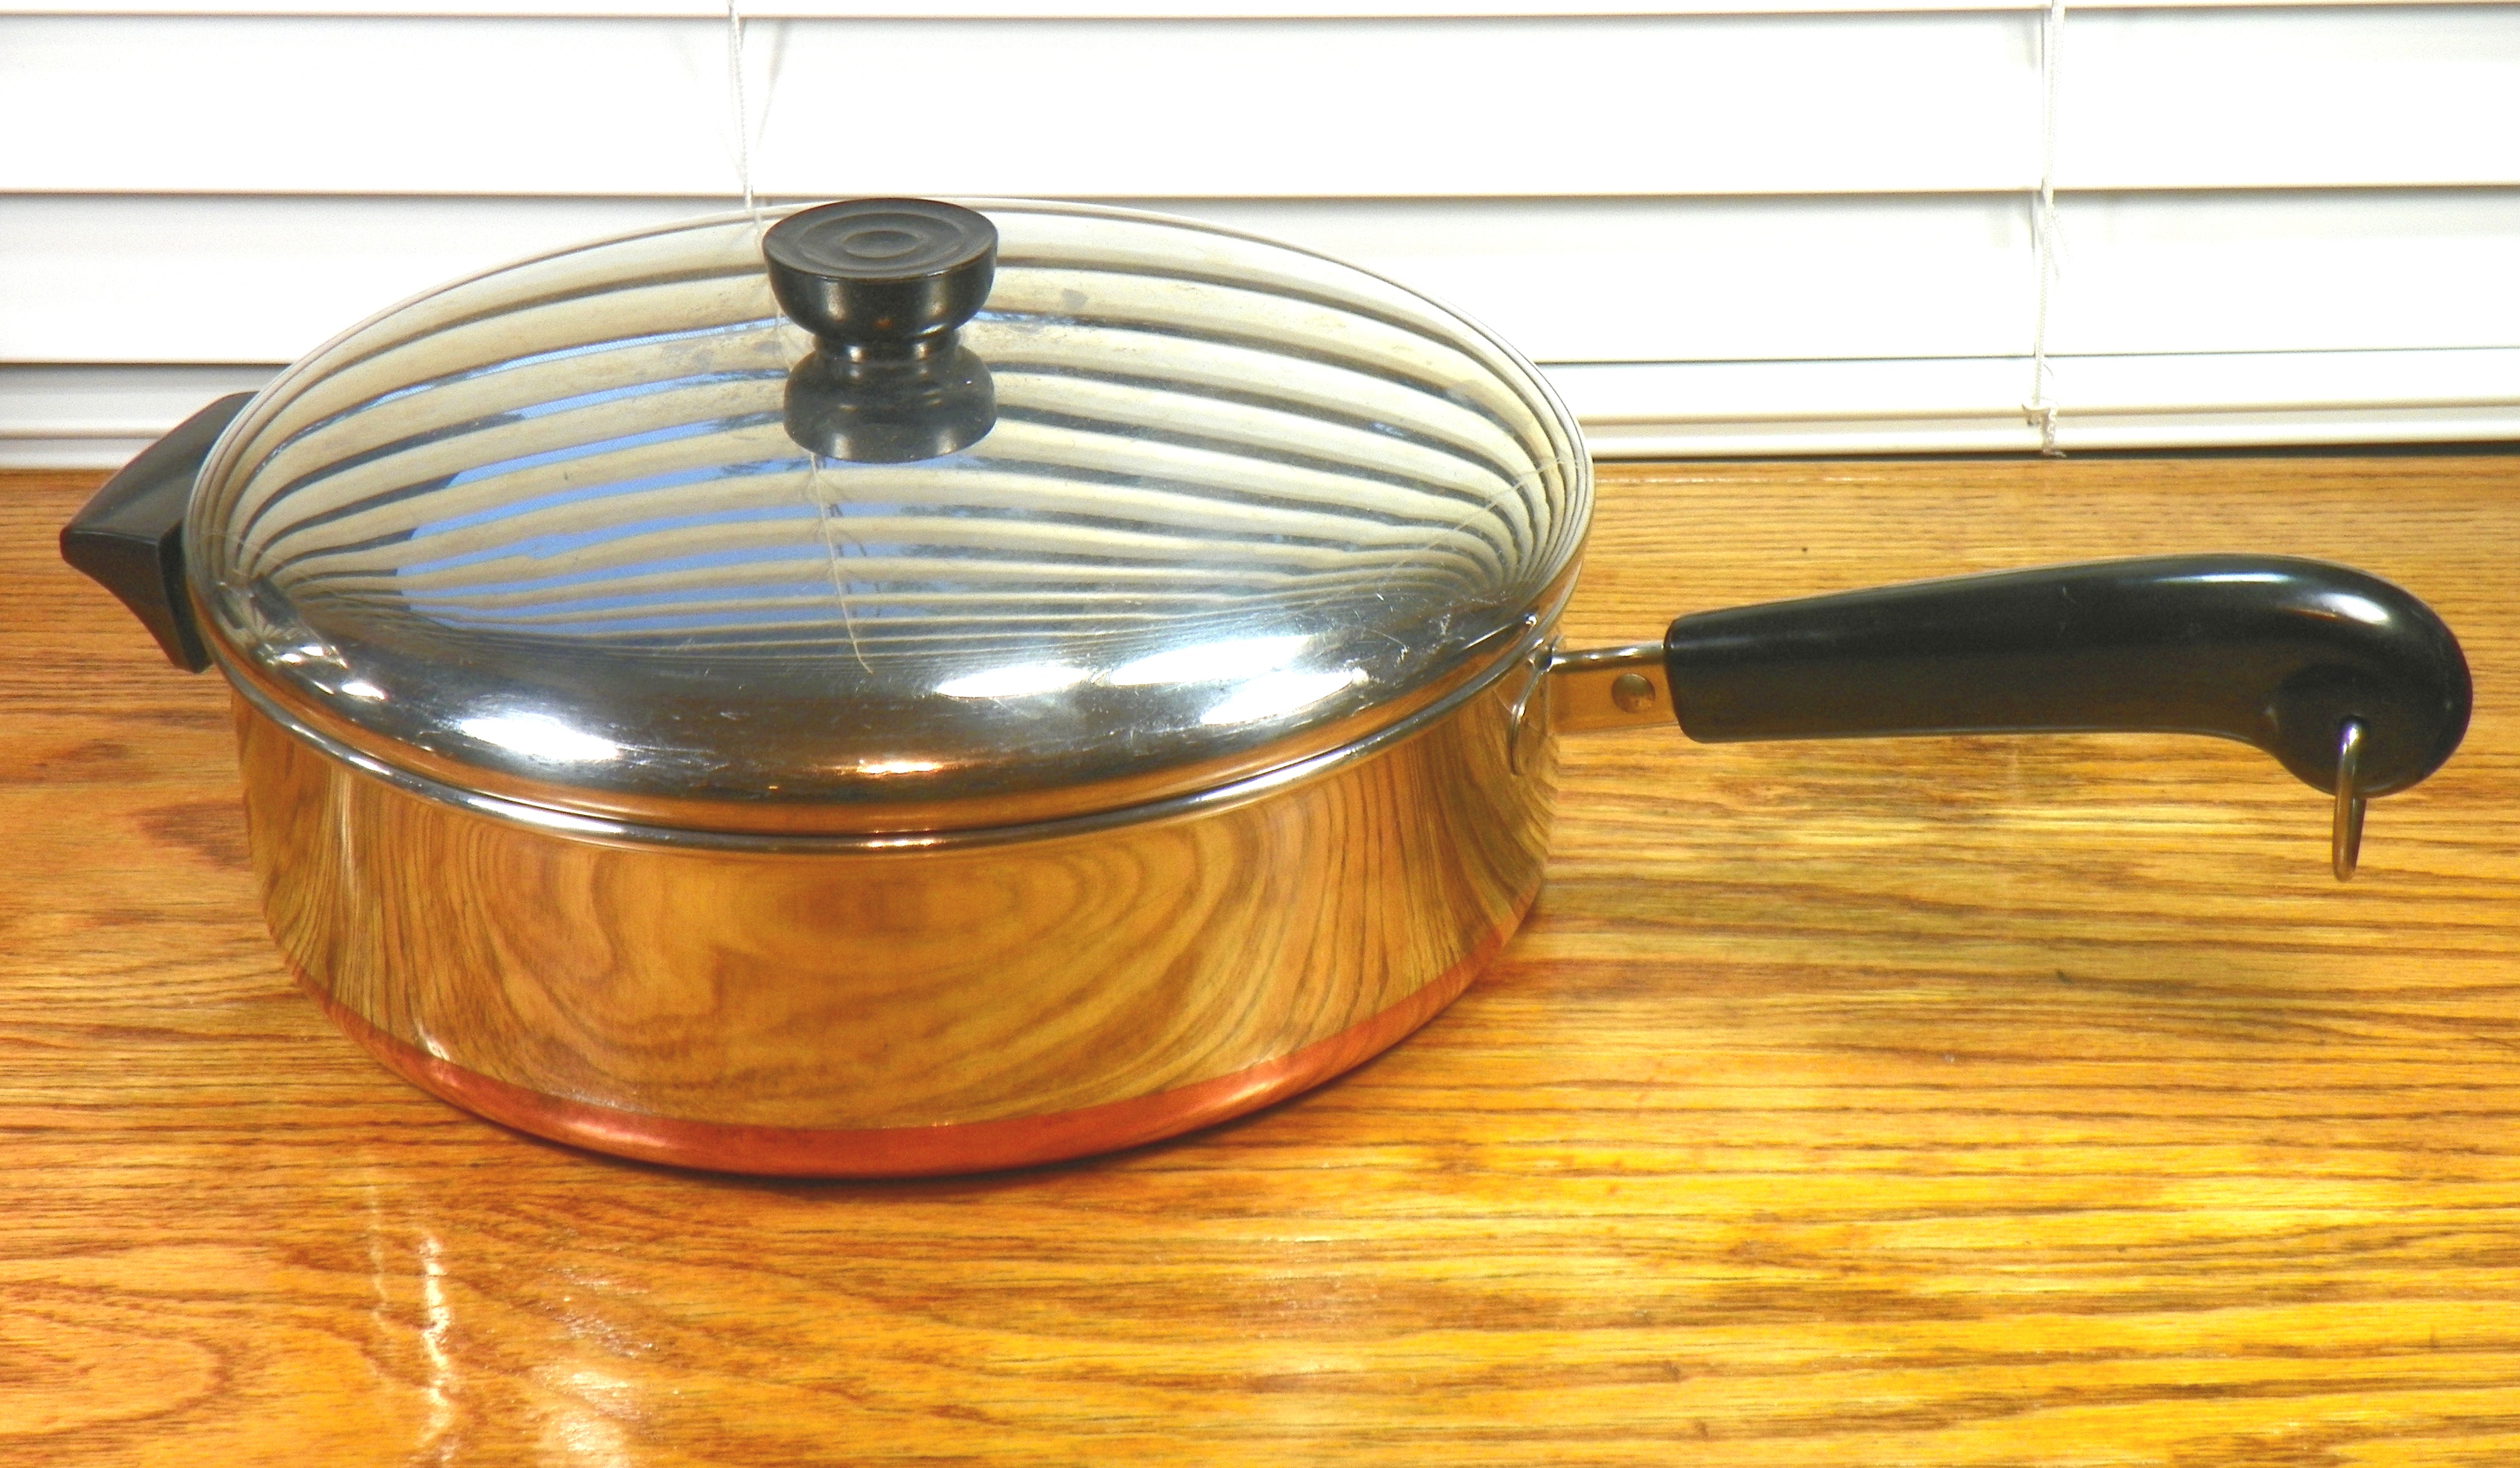 Revere Ware 12 Inch Skillet Fry Pan Tri-Ply Disc Bottom Lid